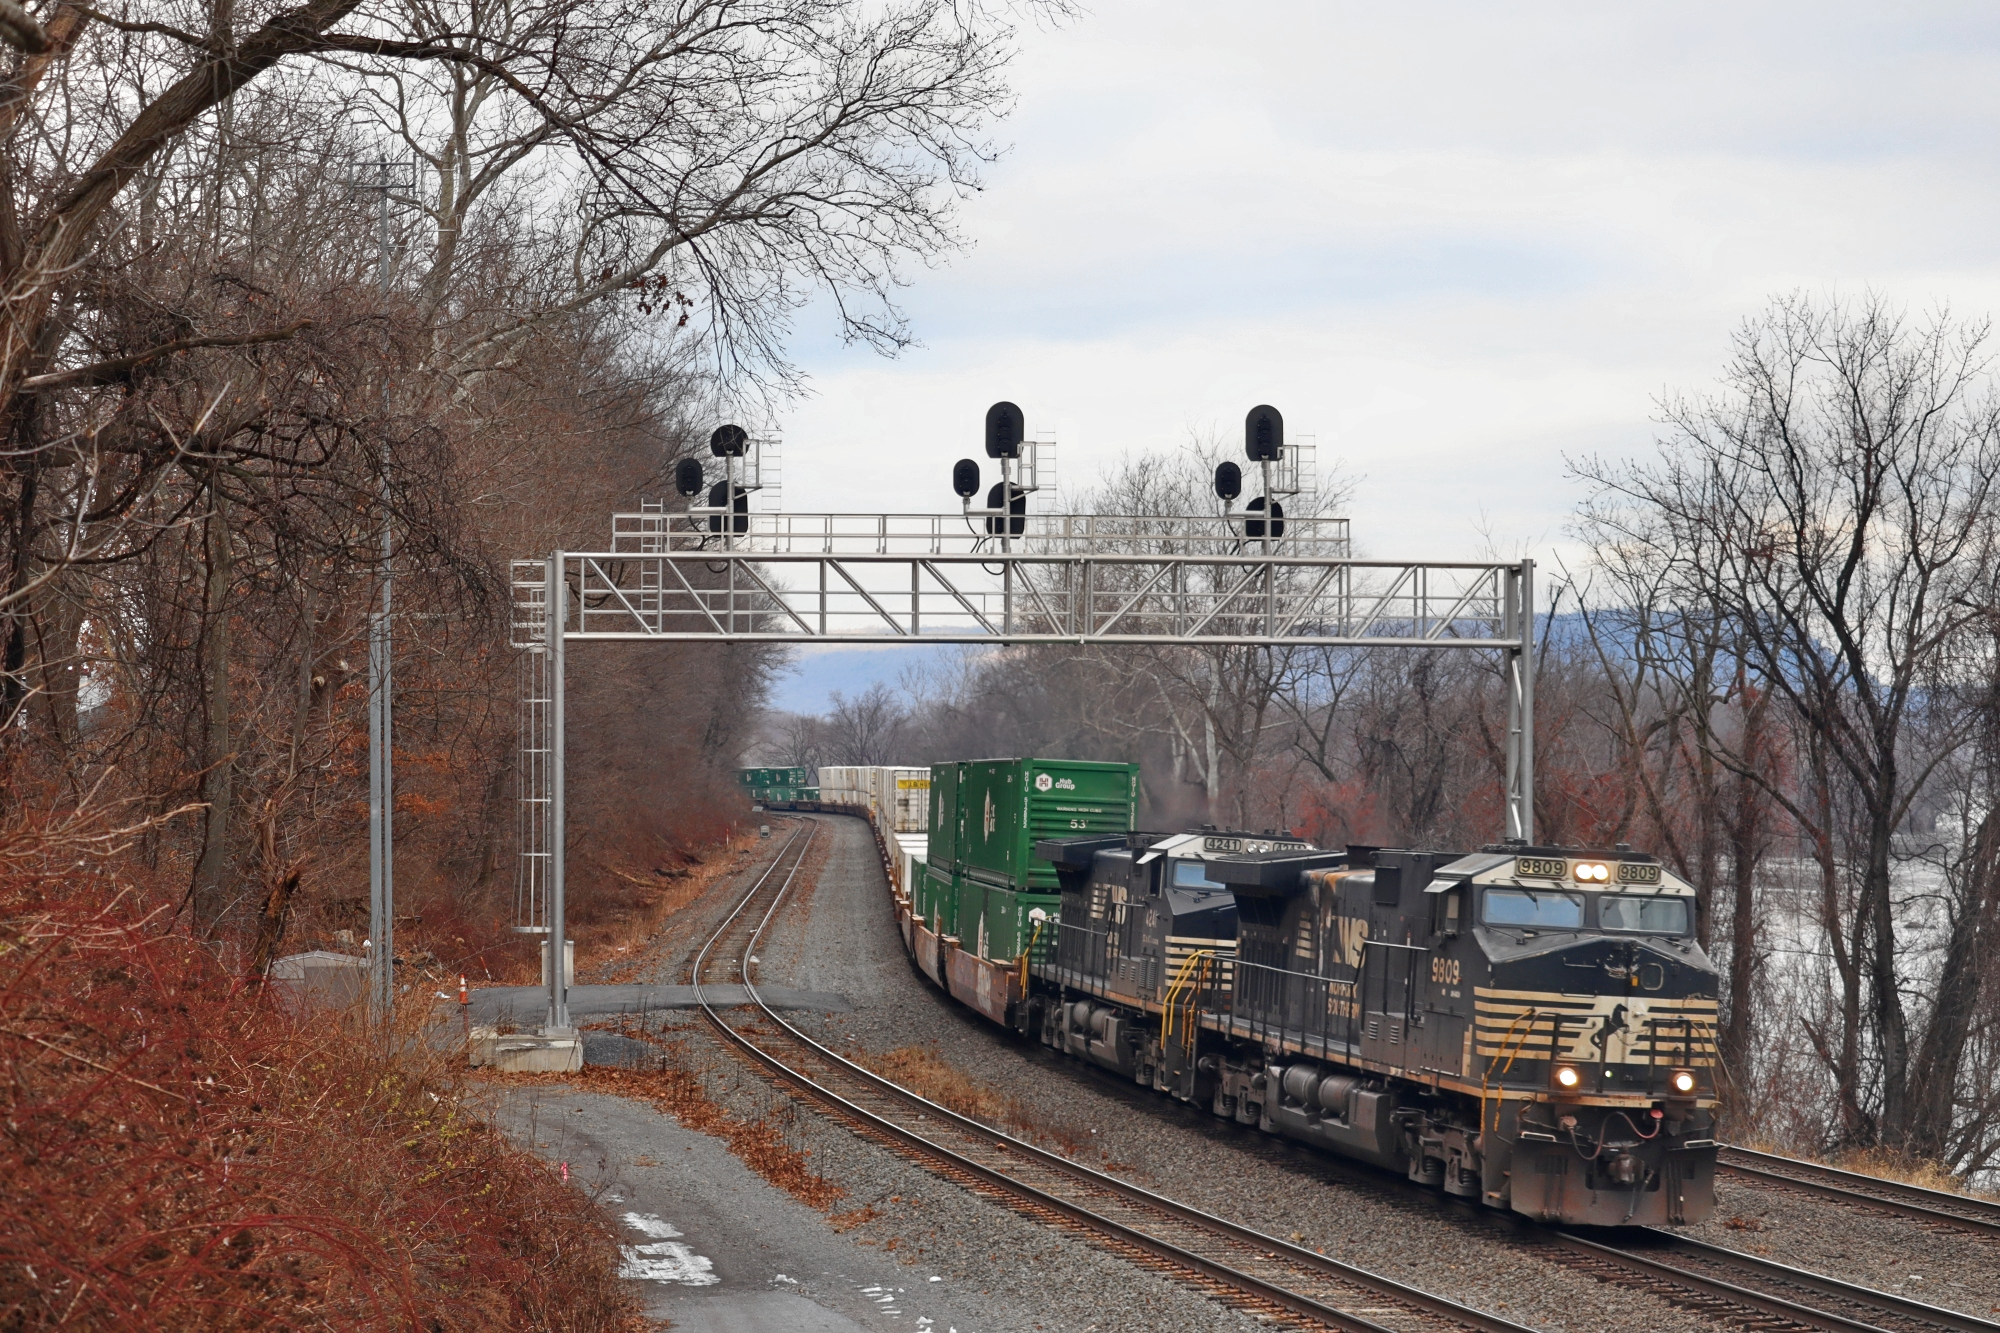 NS 98089 is a class GE C40-9W (Dash 9-40CW) and  is pictured in Harrisburg, Pennsylvania, USA.  This was taken along the NS Pittsburgh line on the Norfolk Southern Railway. Photo Copyright: Robby Lefkowitz uploaded to Railroad Gallery on 12/22/2022. This photograph of NS 98089 was taken on Monday, December 19, 2022. All Rights Reserved. 